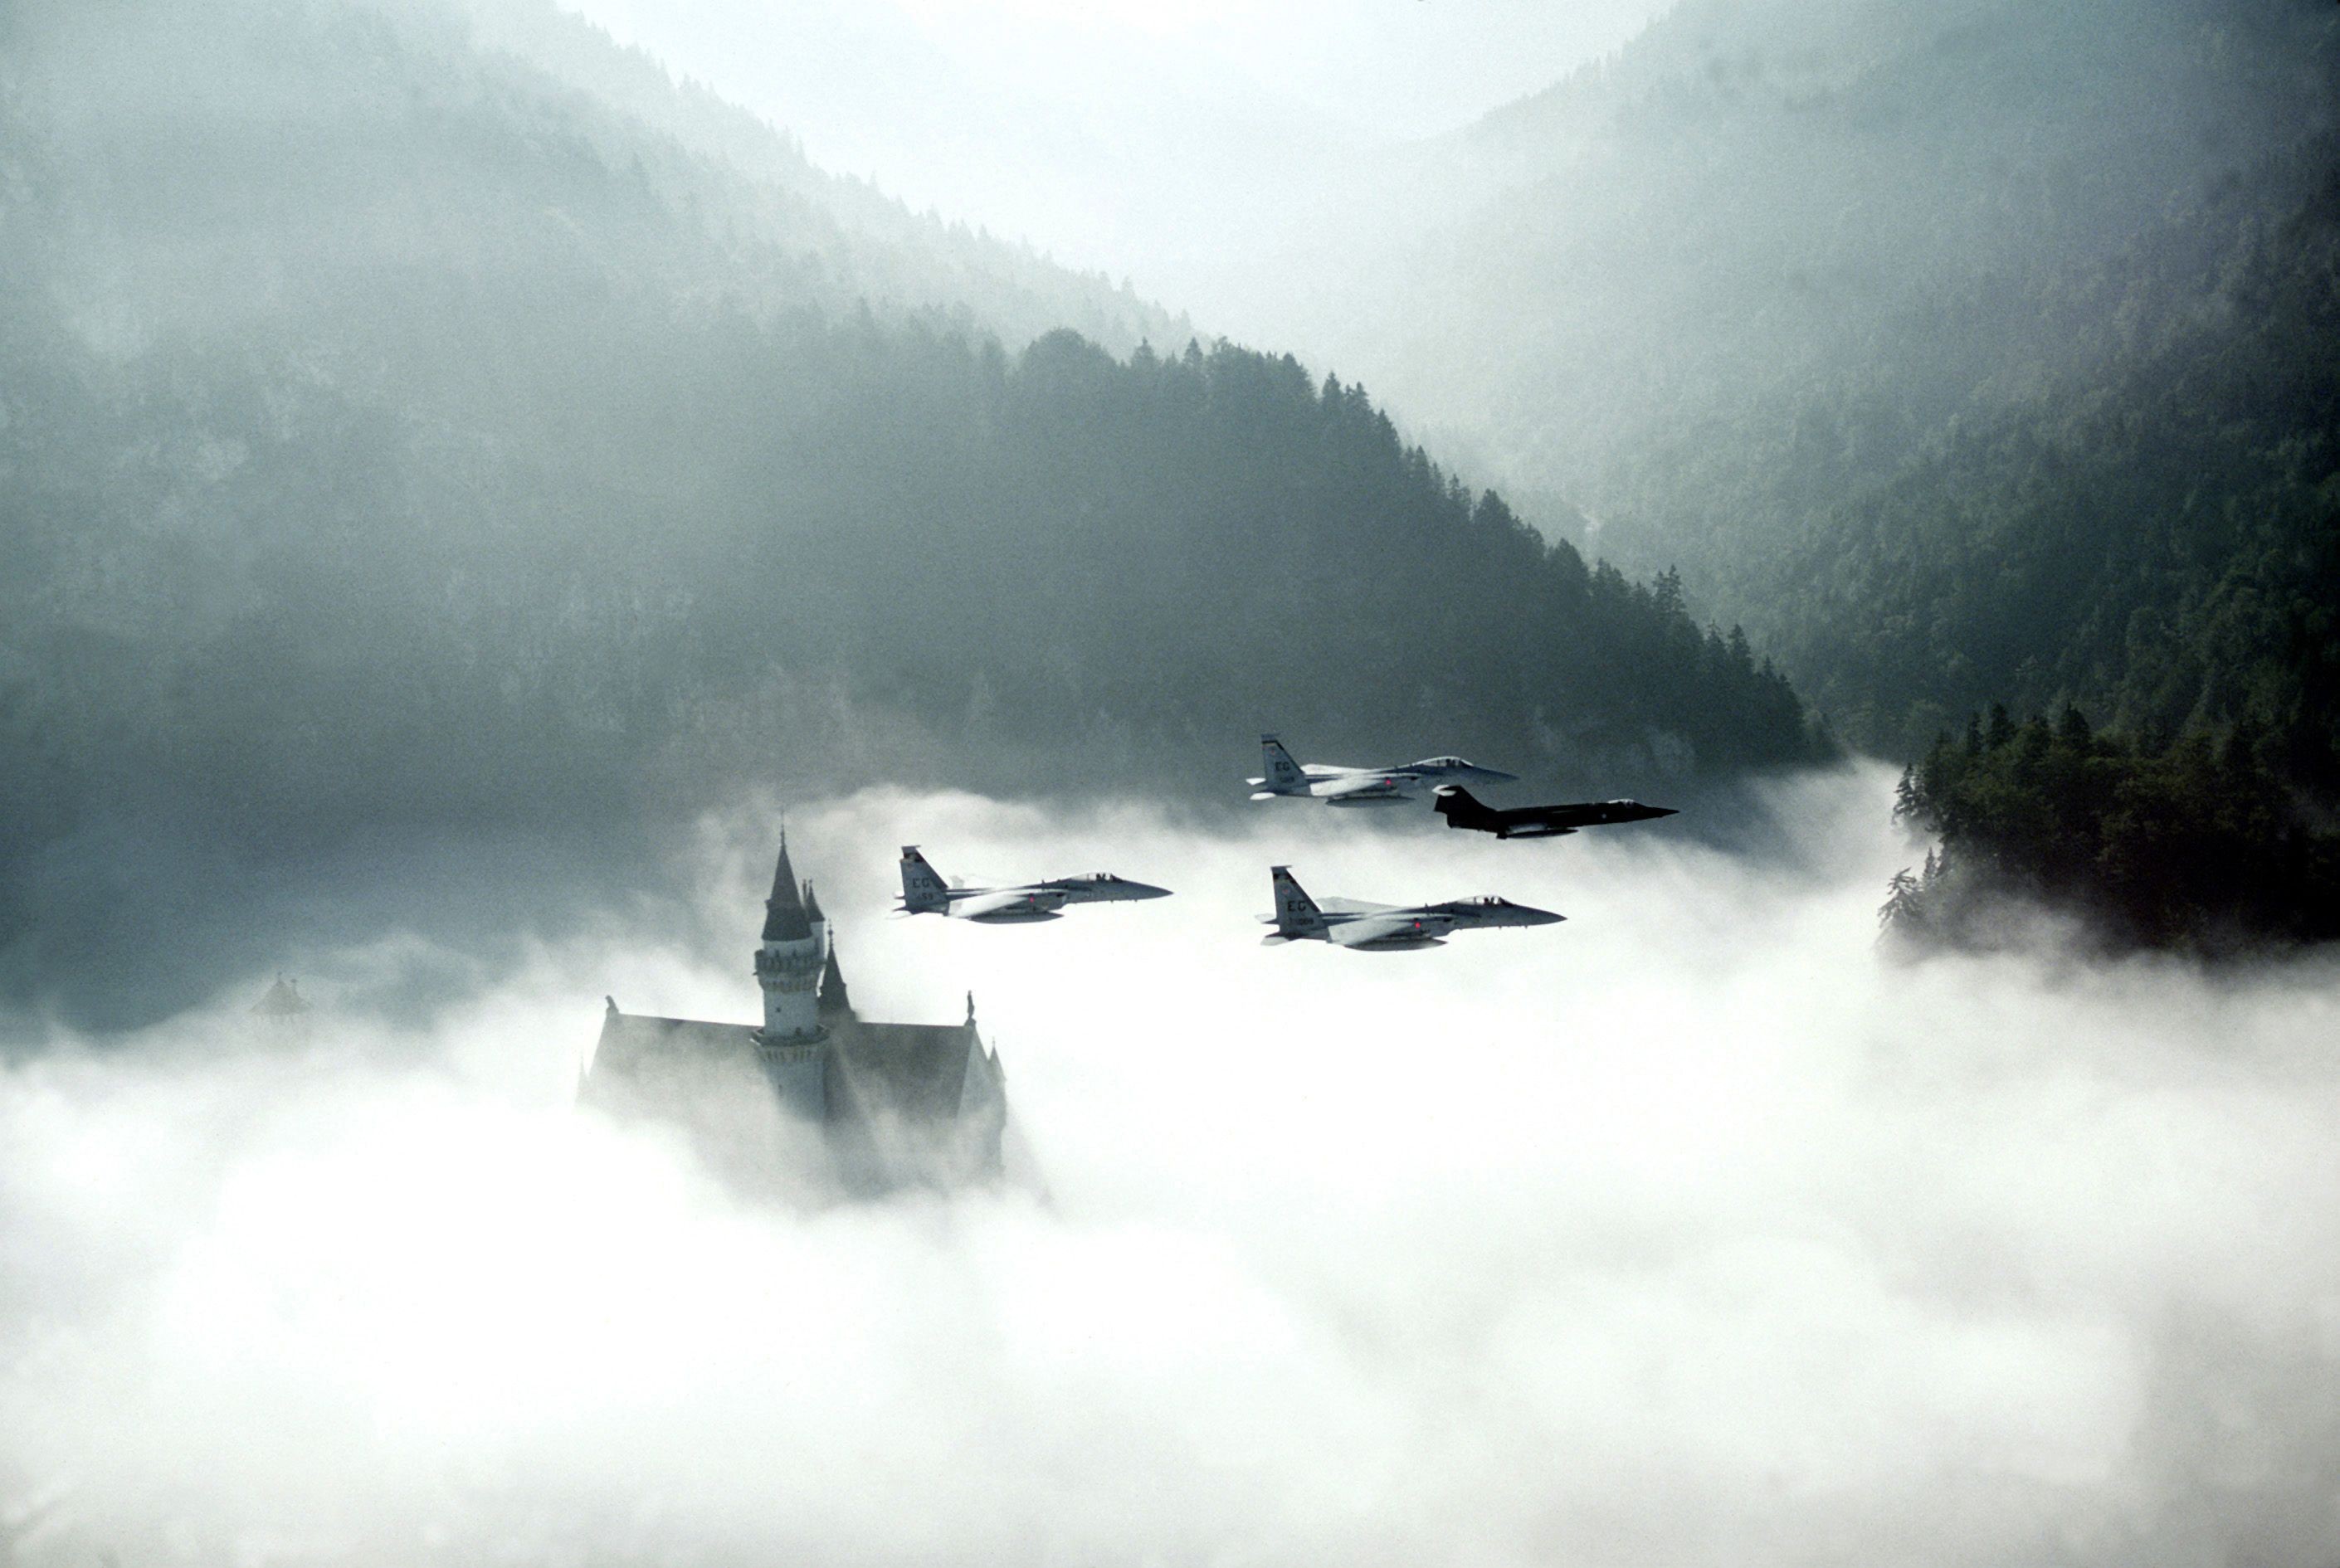 General 2820x1890 nature landscape airplane clouds castle jet fighter Neuschwanstein Castle F-15 Eagle Lockheed F-104 Starfighter military aircraft aircraft military vehicle vehicle military Germany